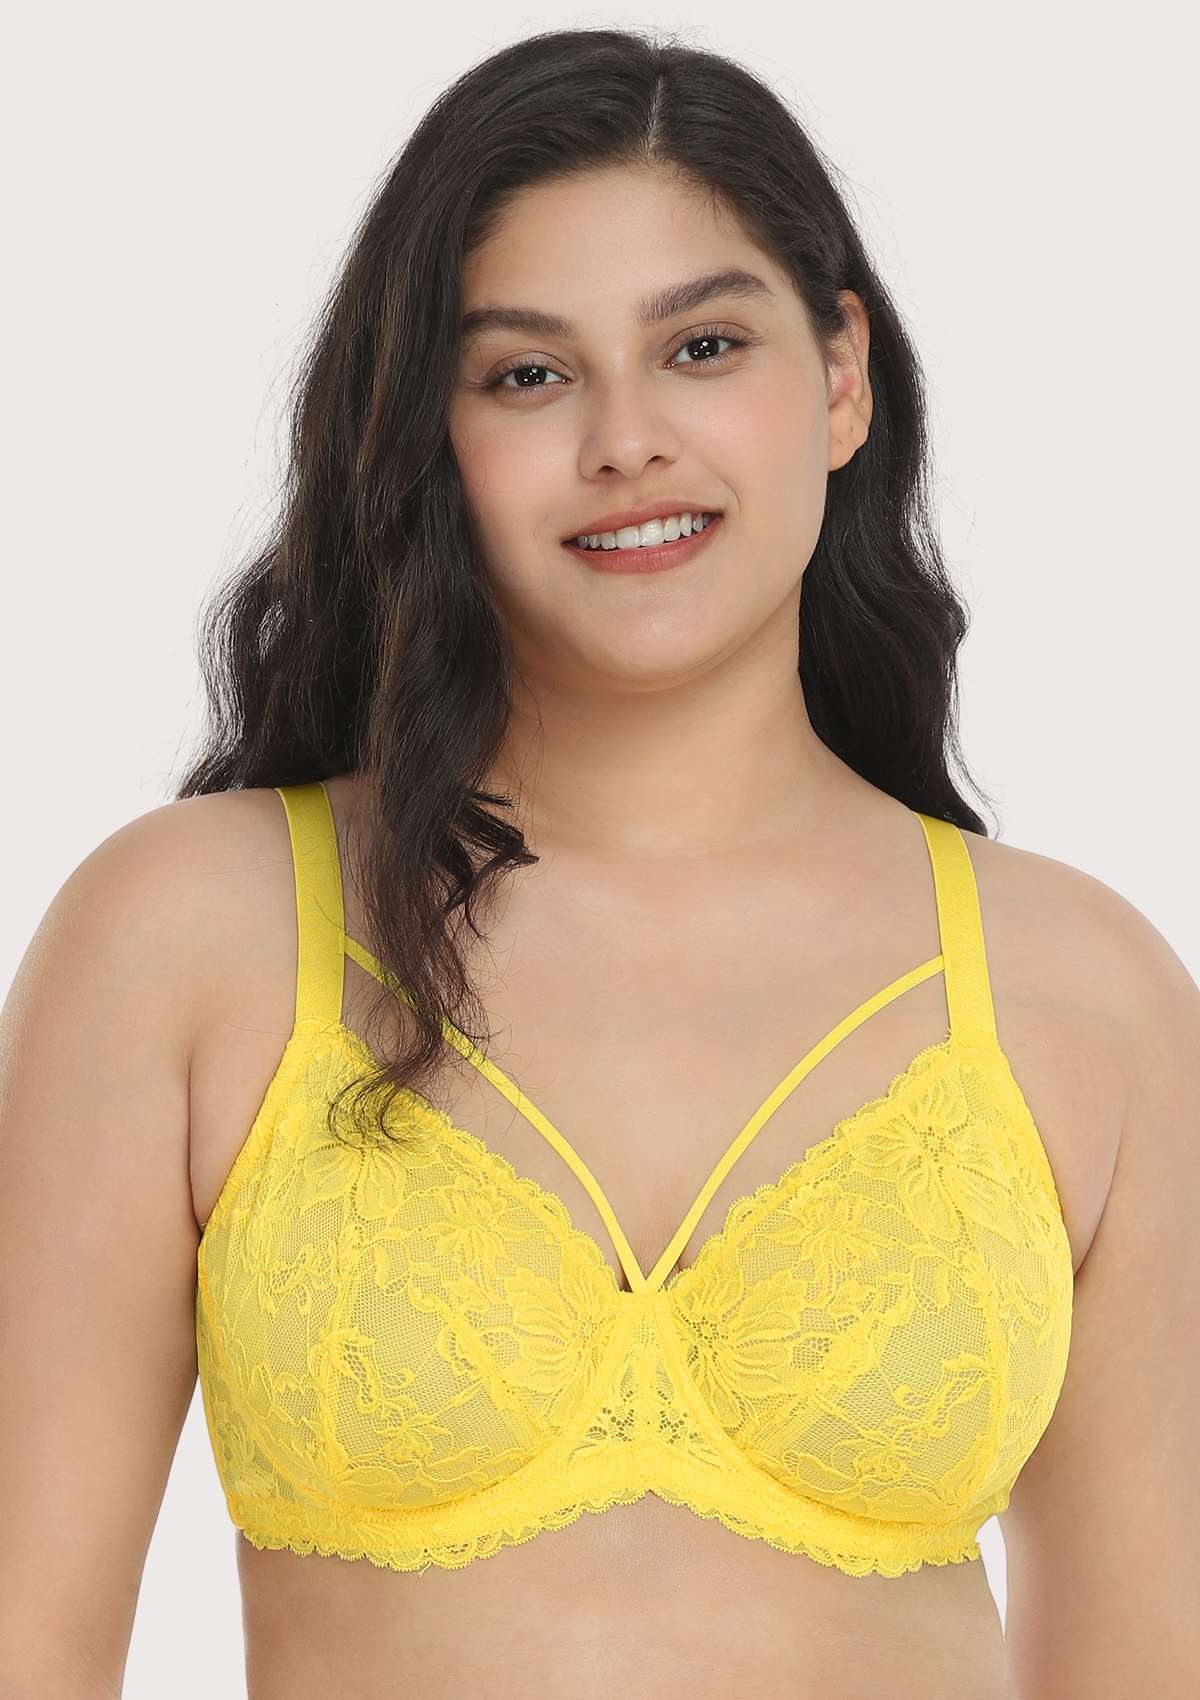 HSIA Unlined Lace Mesh Minimizer Bra For Large Breasts, Full Coverage - Bright Green / 44 / DDD/F